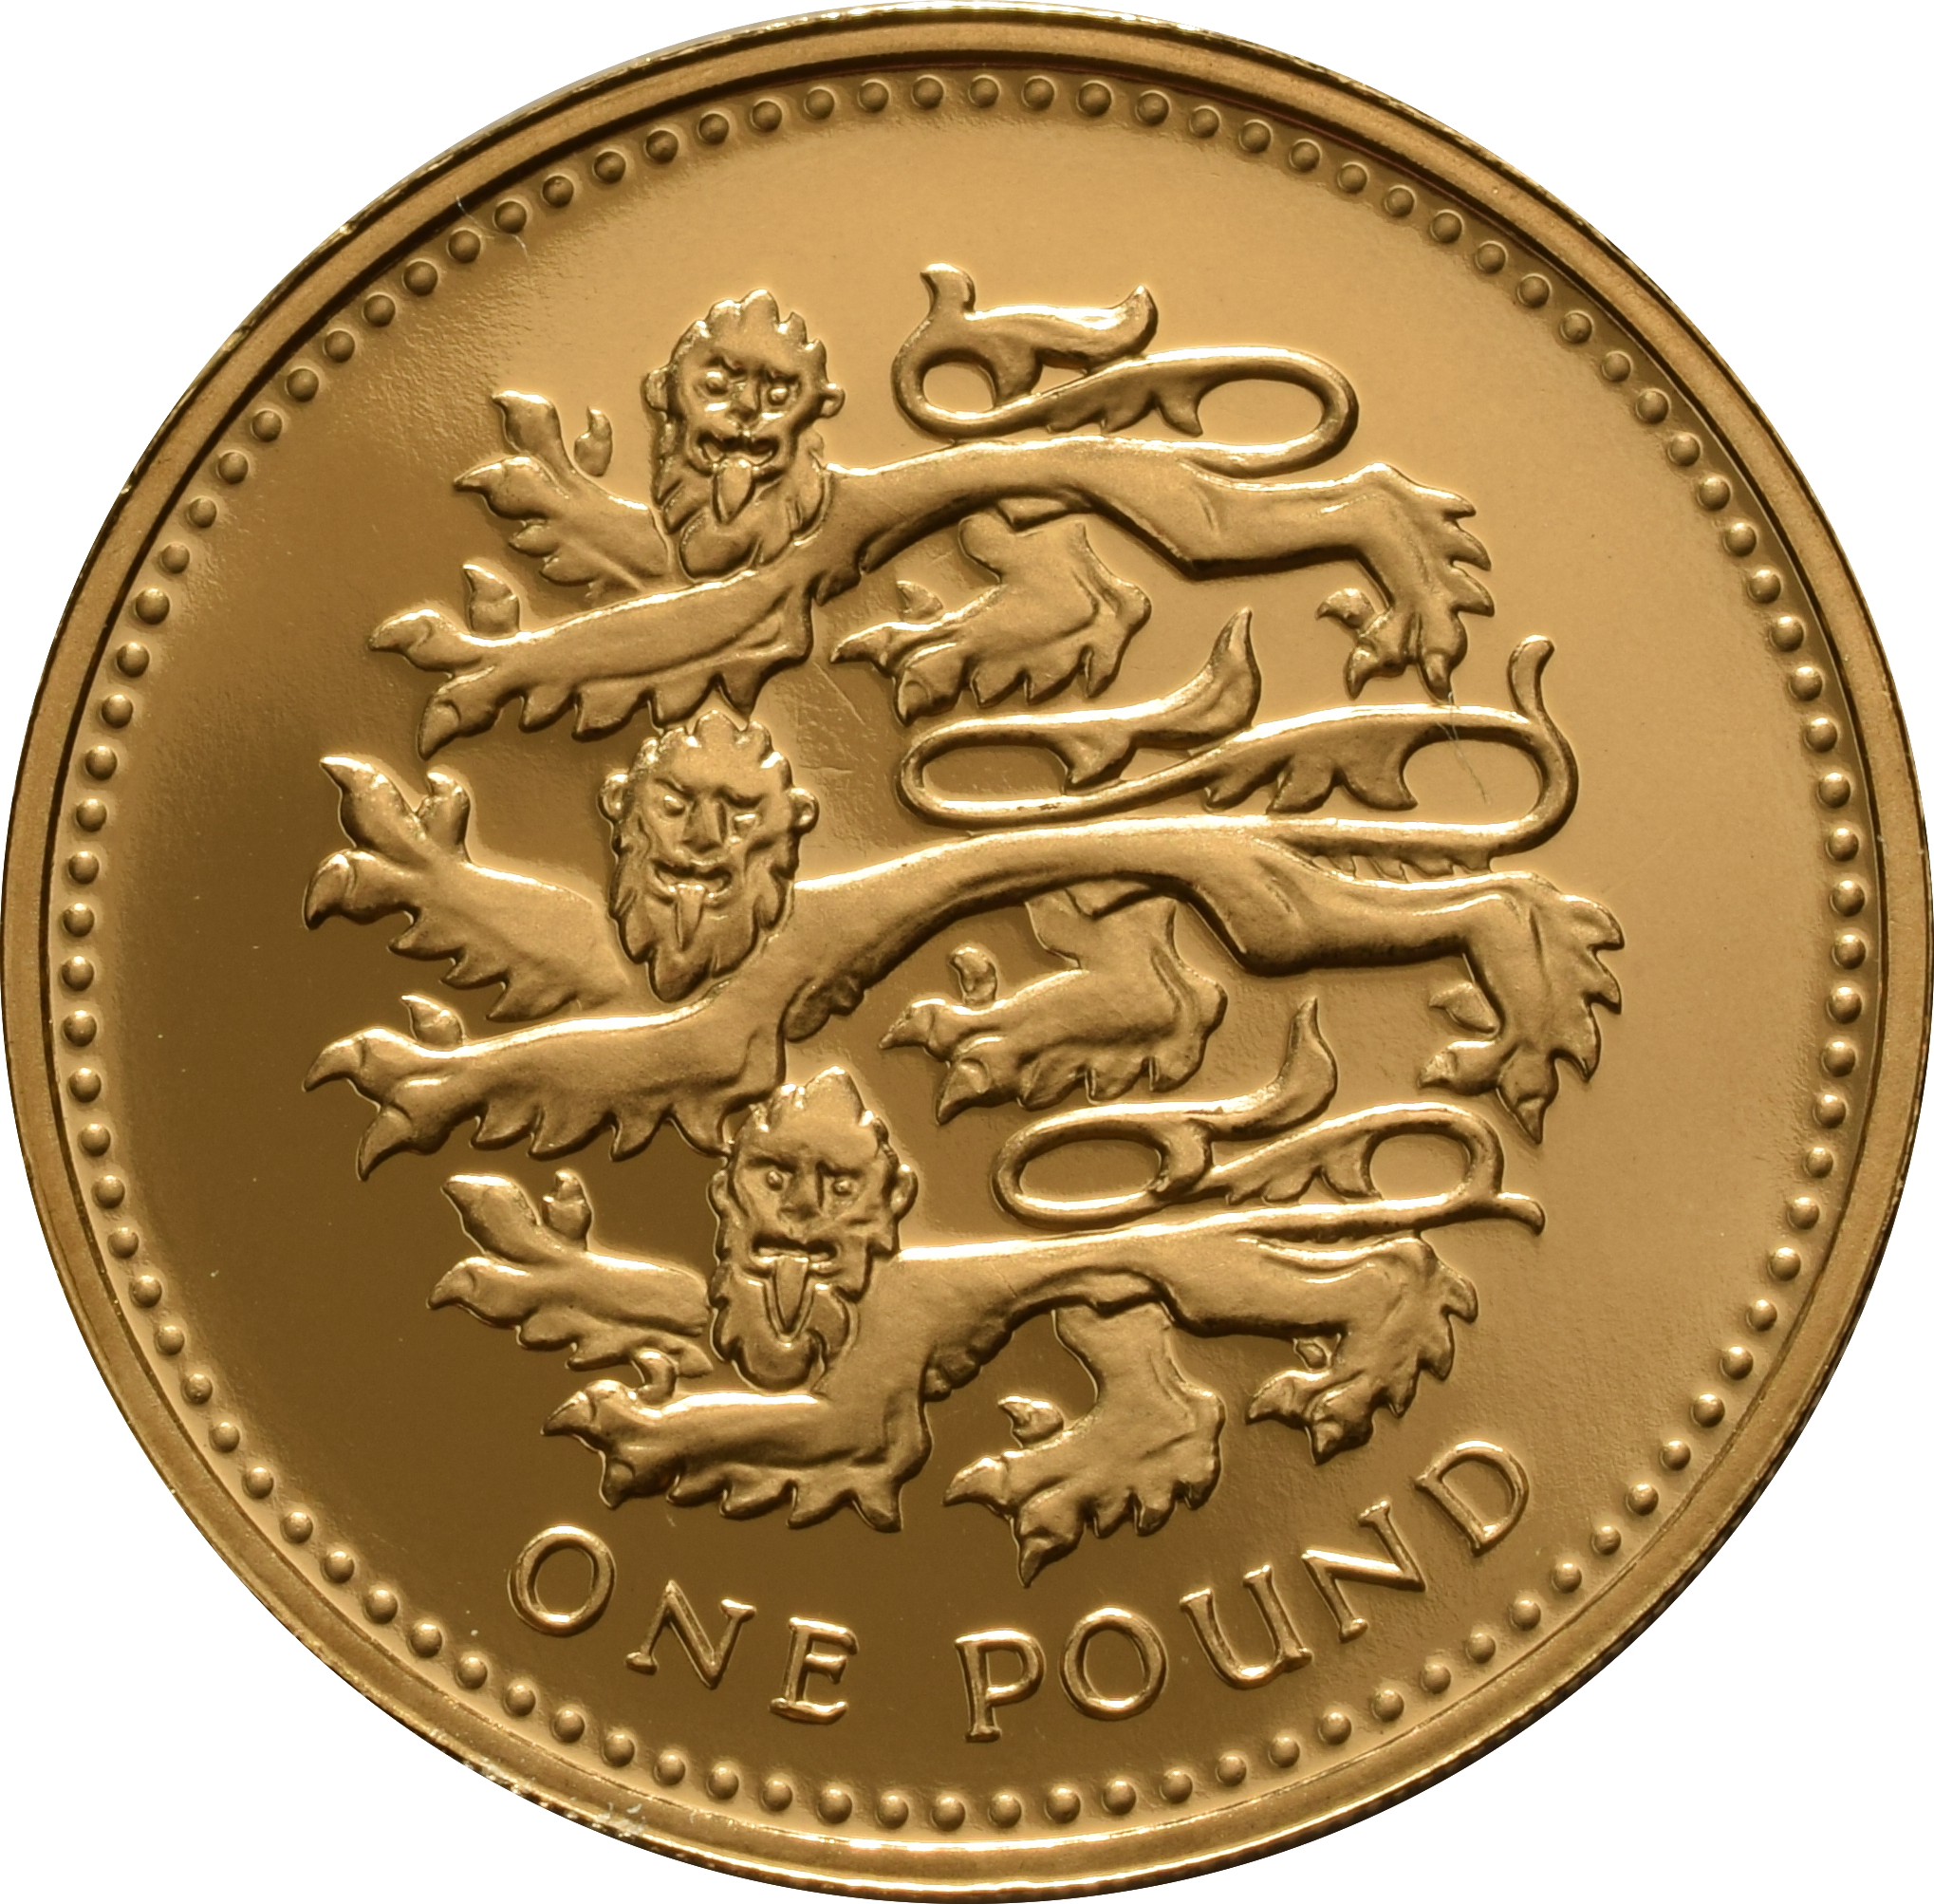 Buy One Pound Gold Coins - £1 Coin | BullionByPost® - From £610